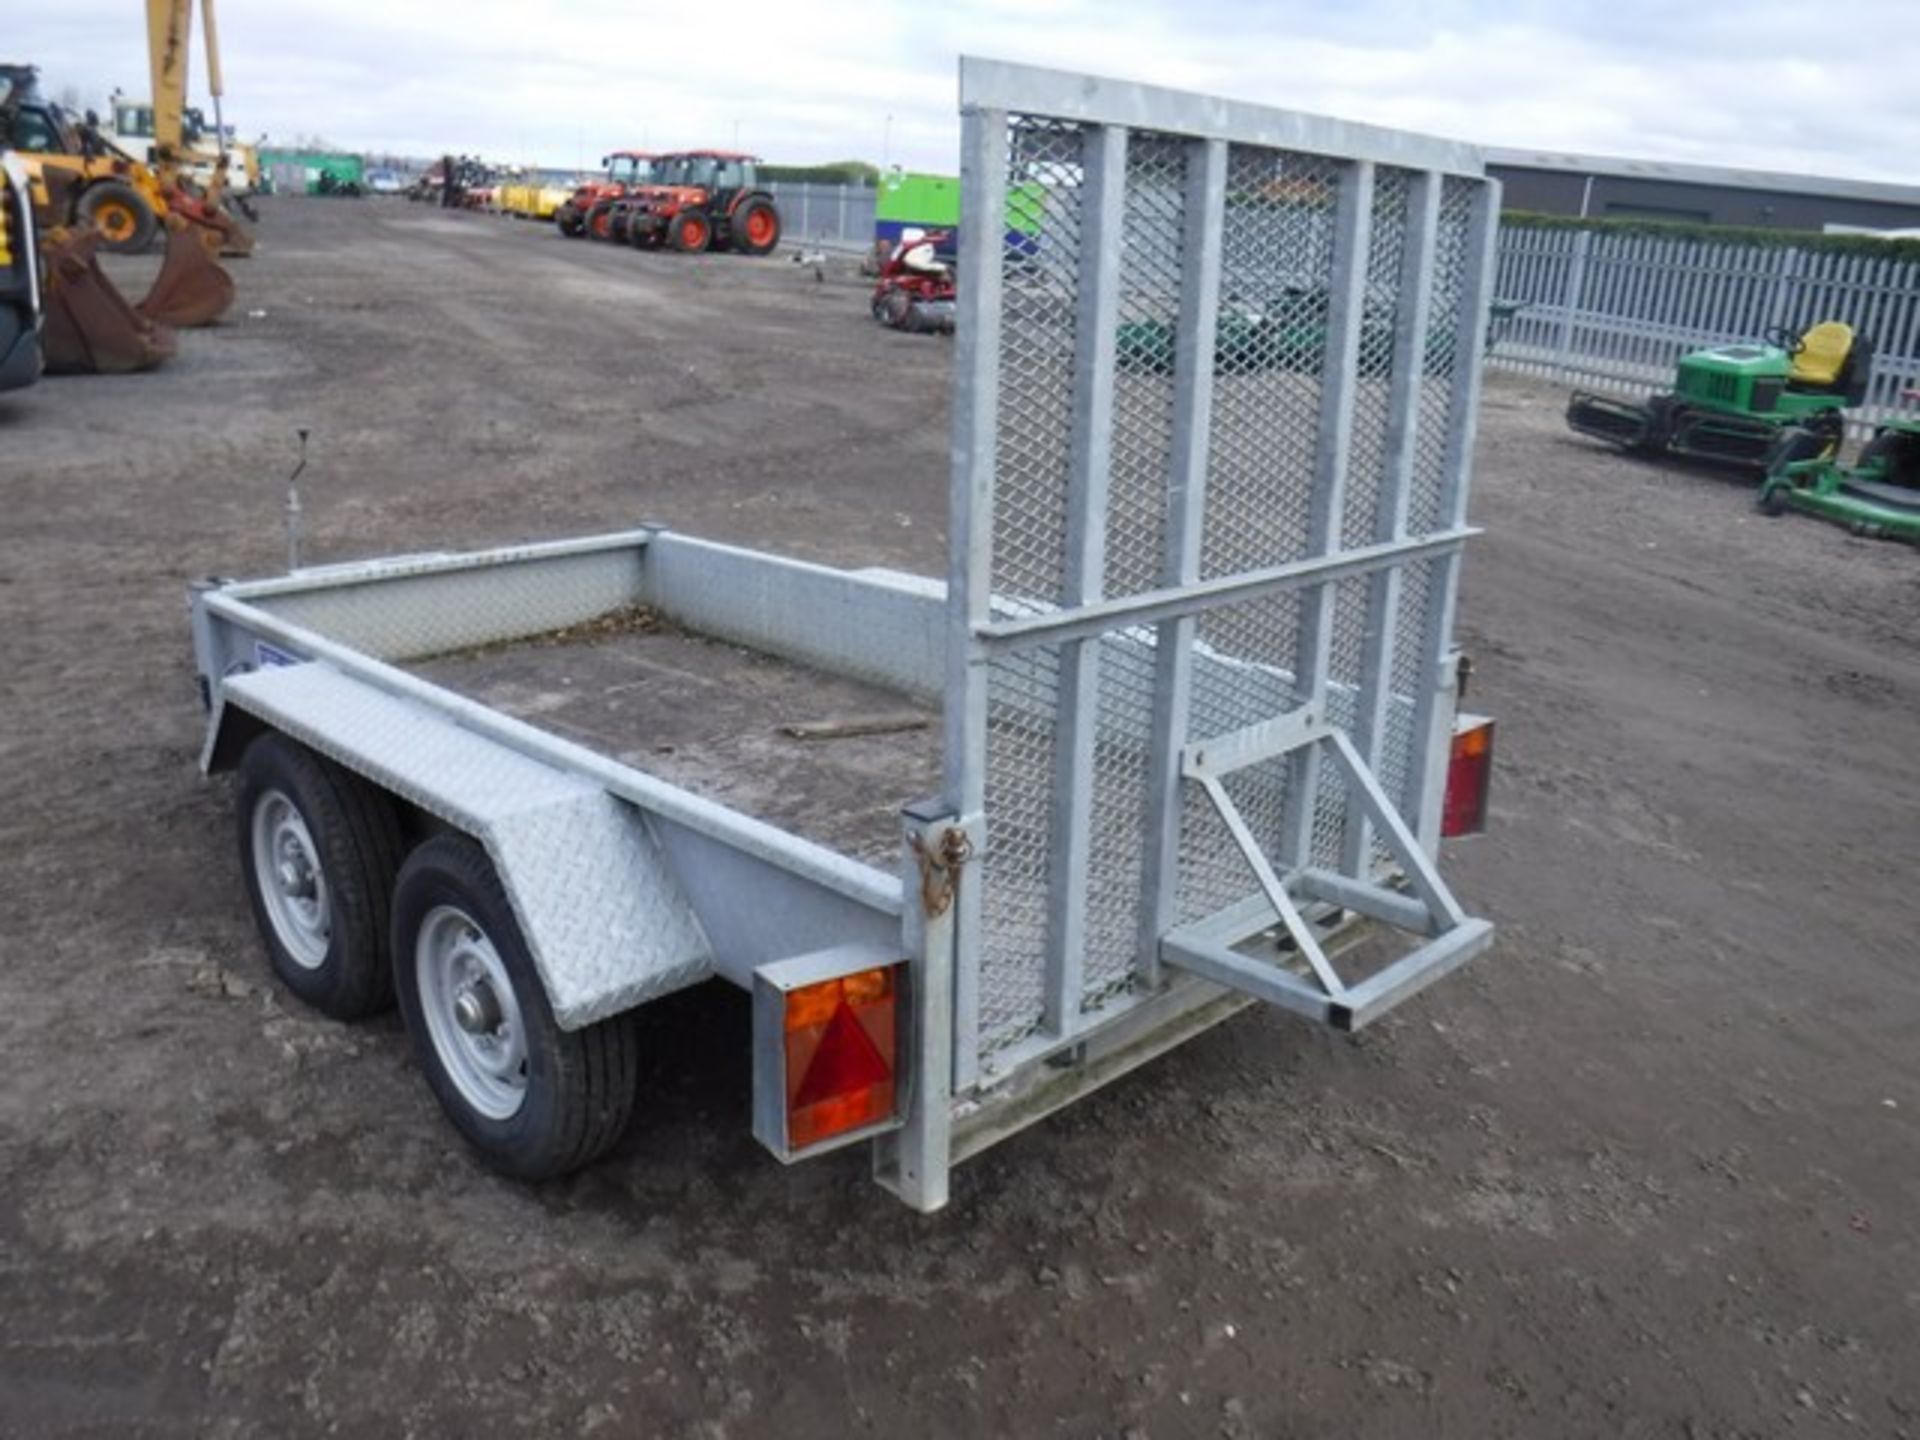 INDESPENSION 8x4 twin axle plant trailer with mesh ramp. ID 071497 - Bild 2 aus 3